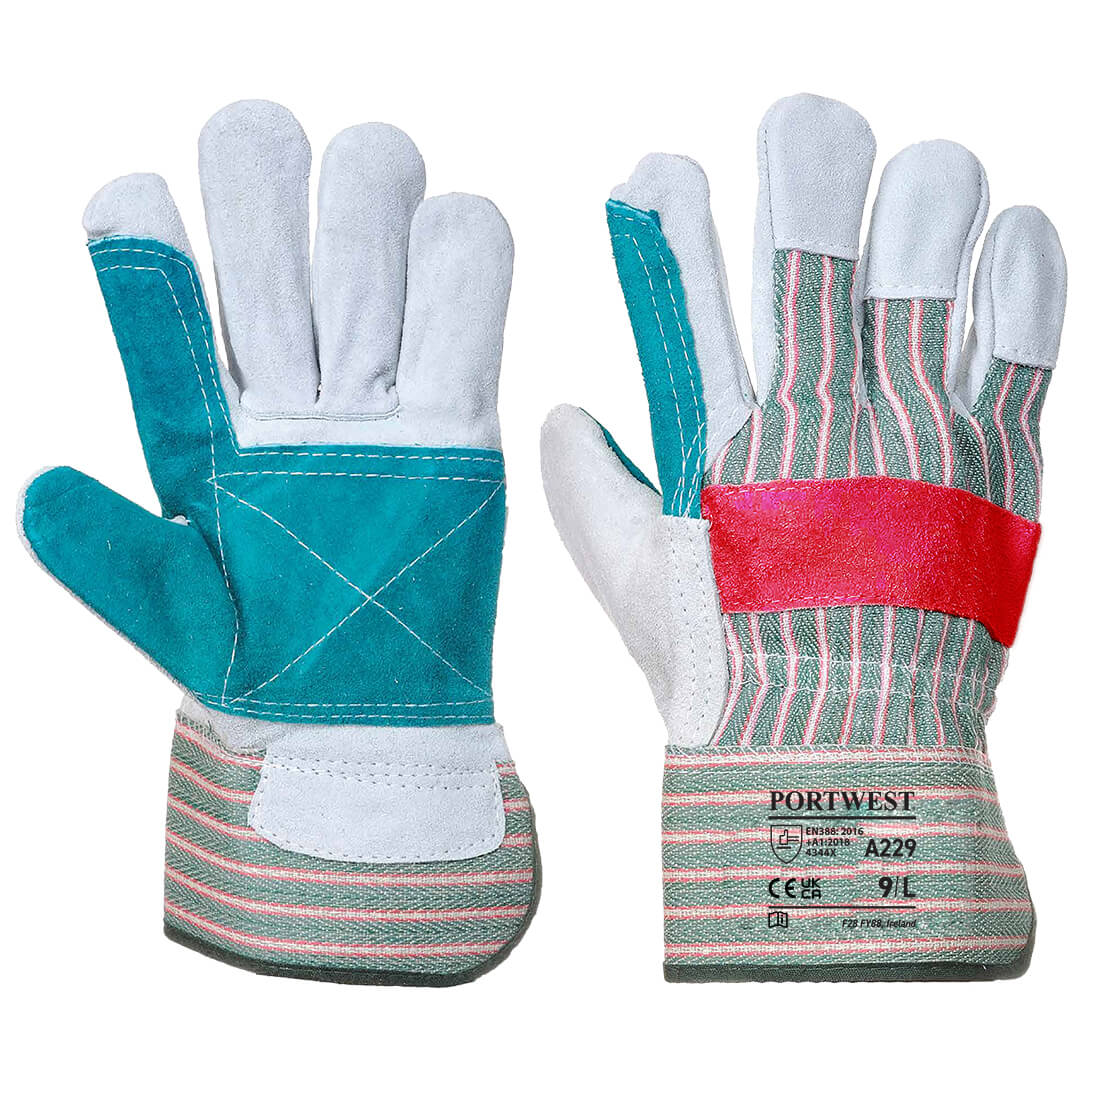 Classic Double Palm Rigger Glove, Morgans PW